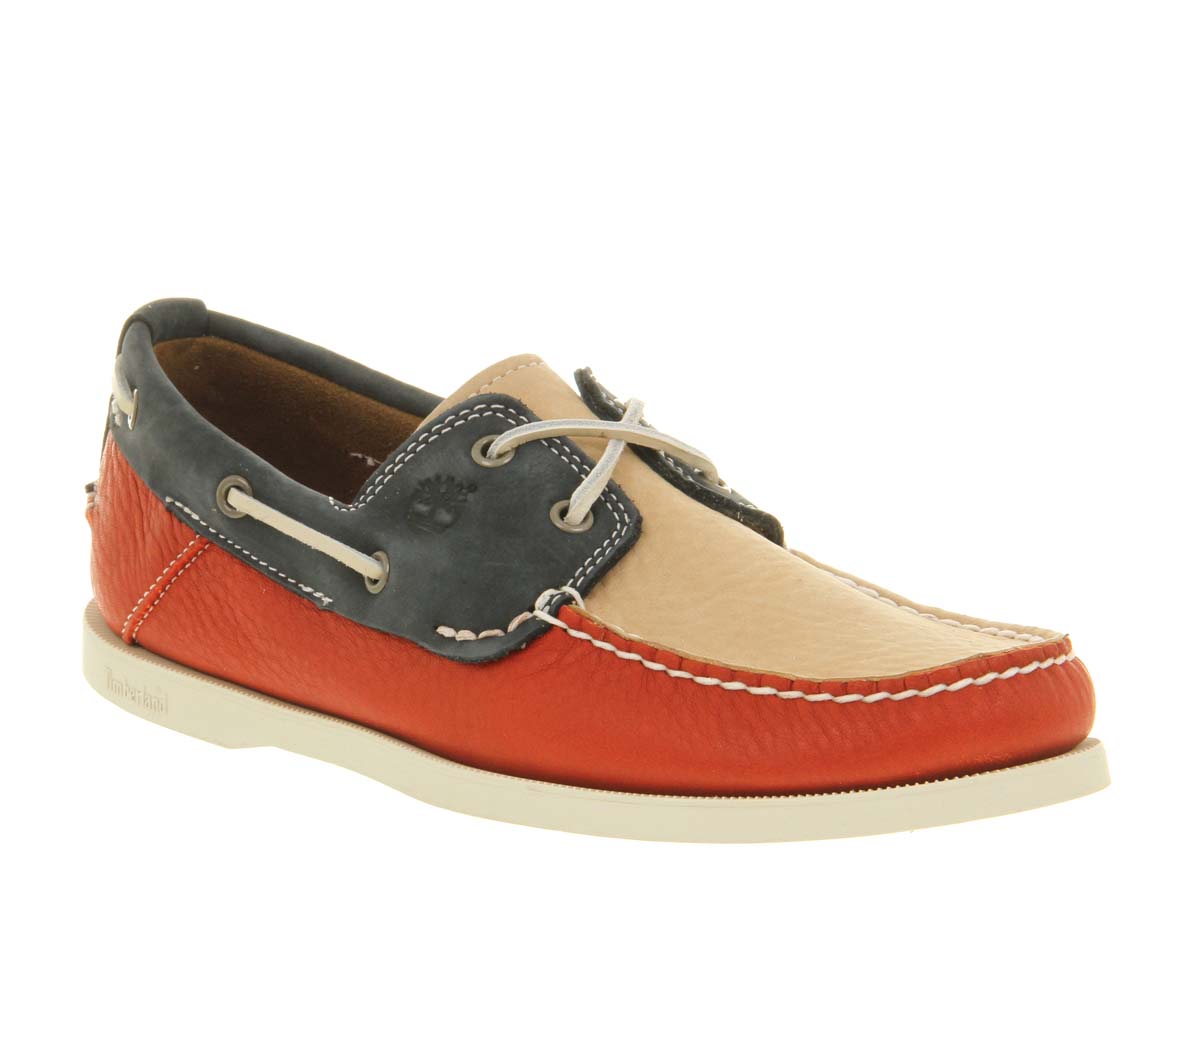 Download this Home His Casual Timberland Tricolour Boat Shoe picture